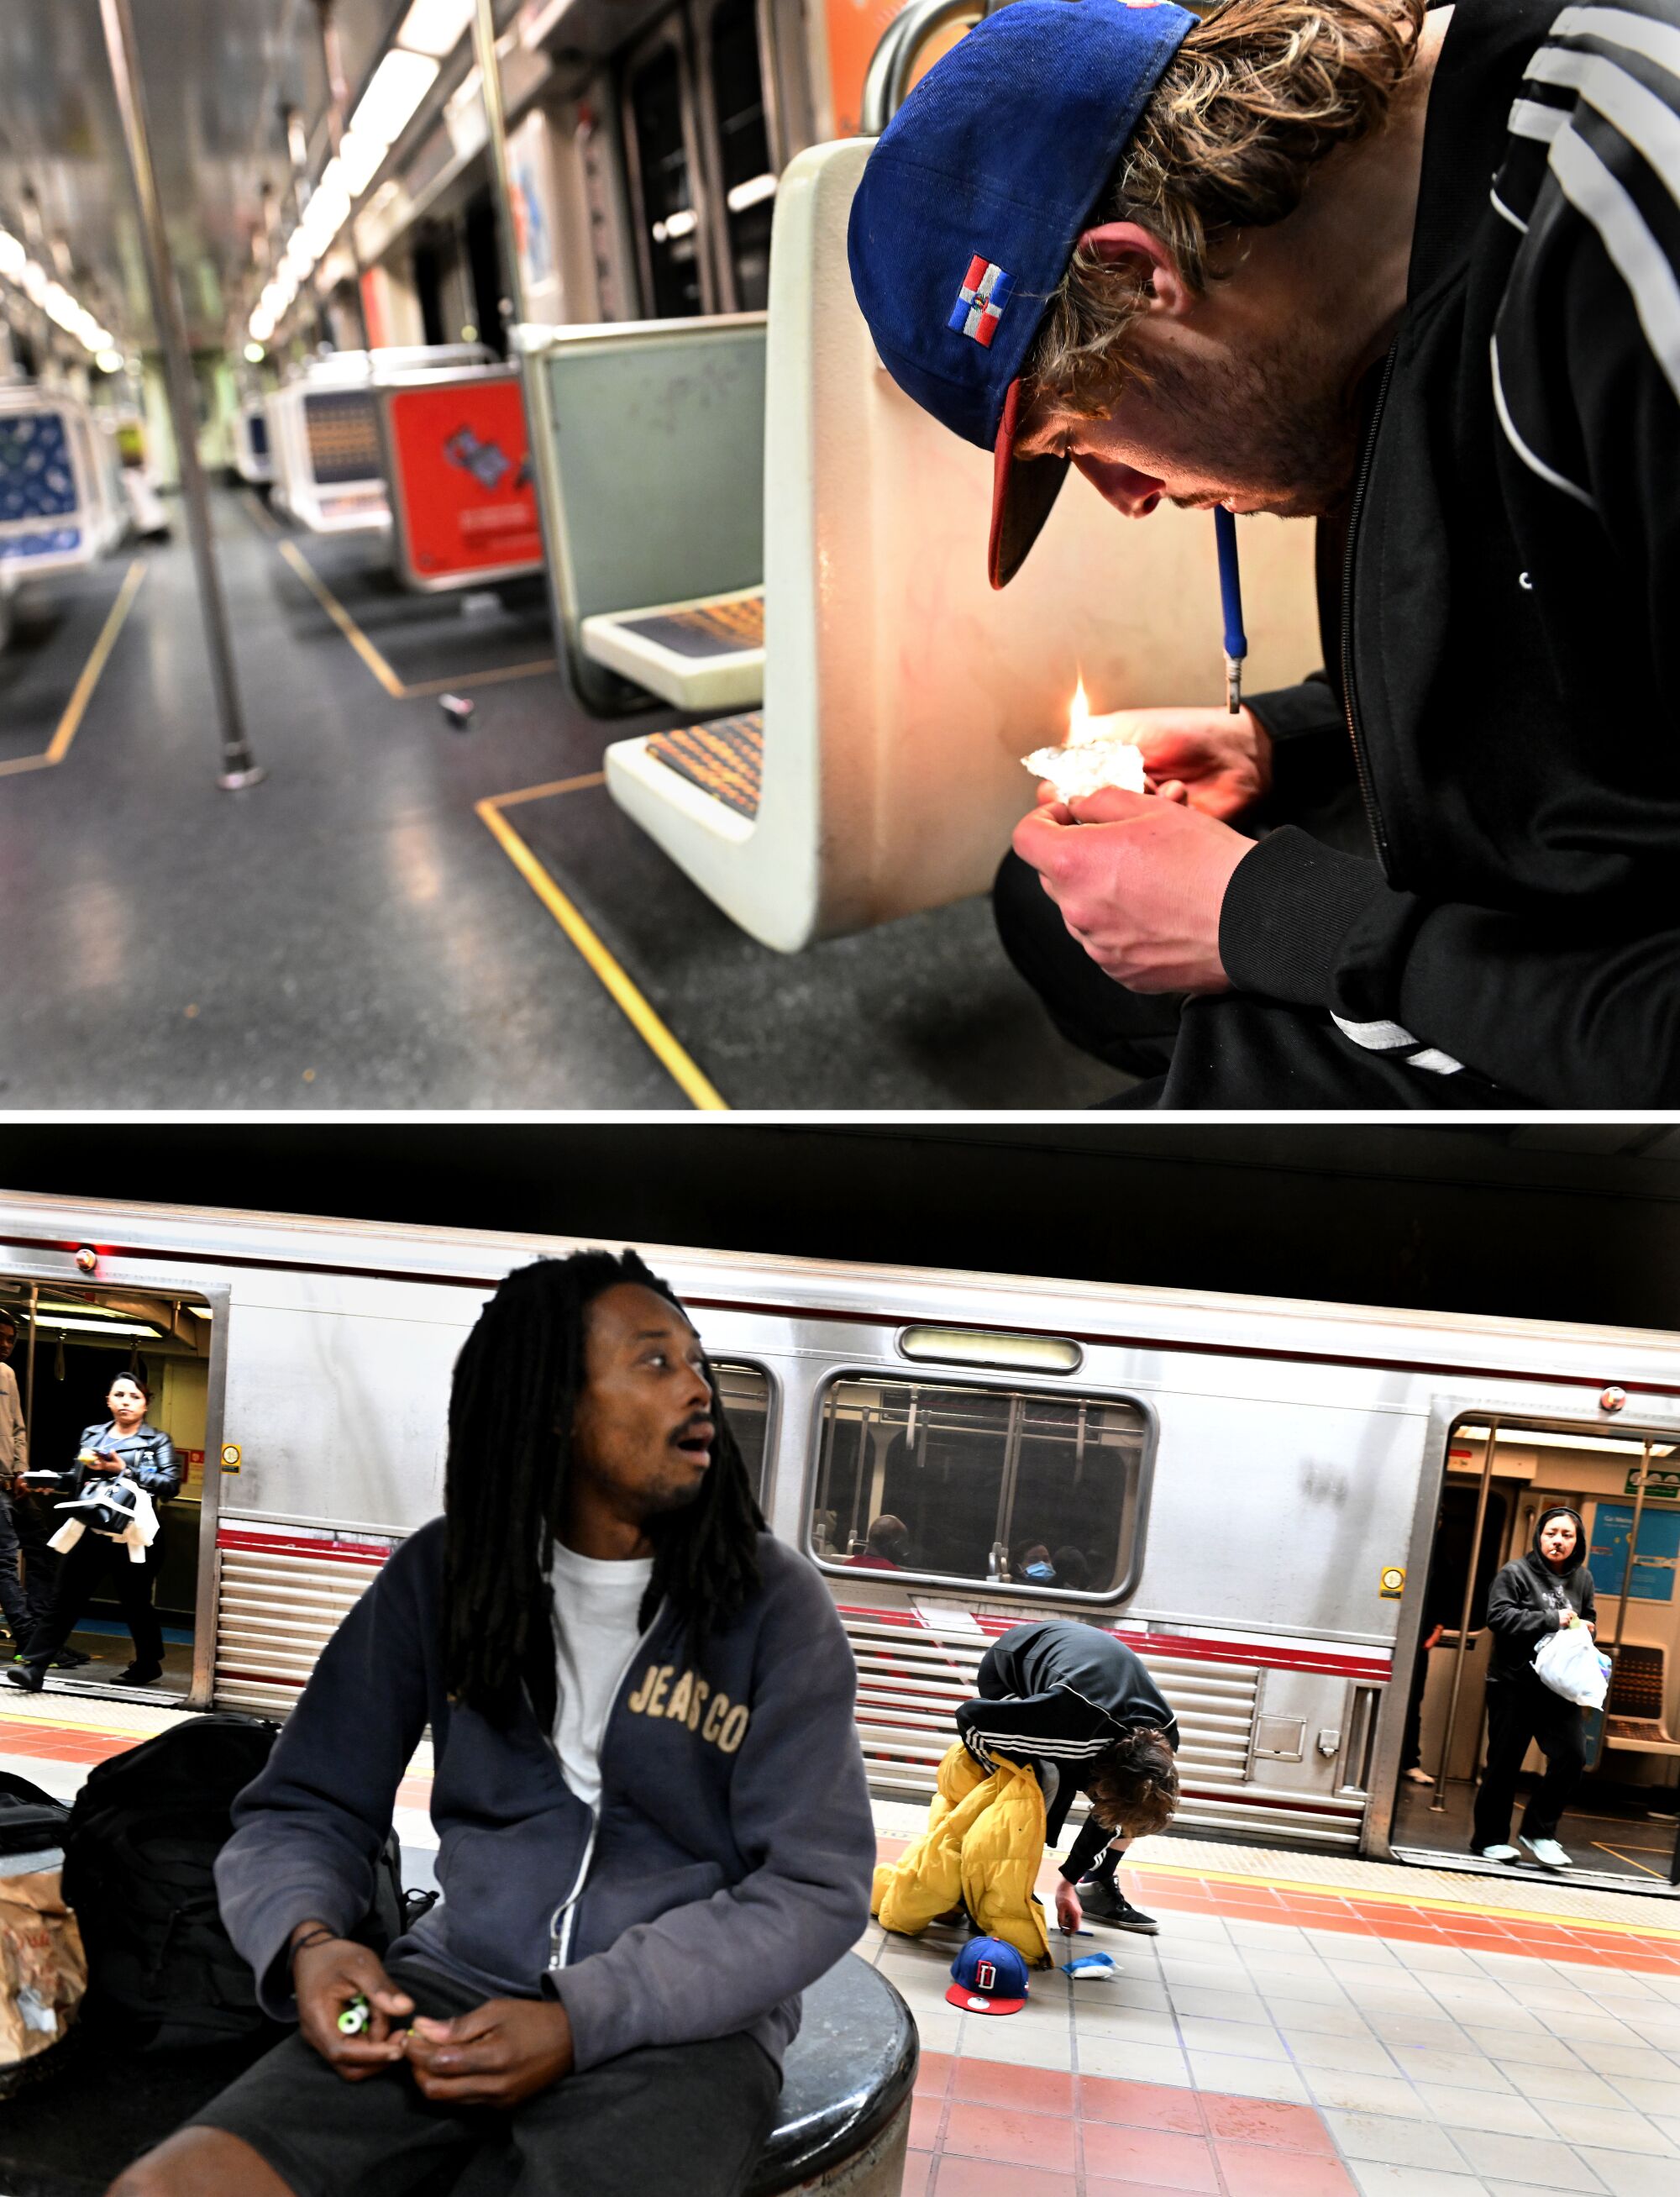 In top image a young man smokes a substance off of an aluminum foil. And below, a man sits on a subway bench as train arives